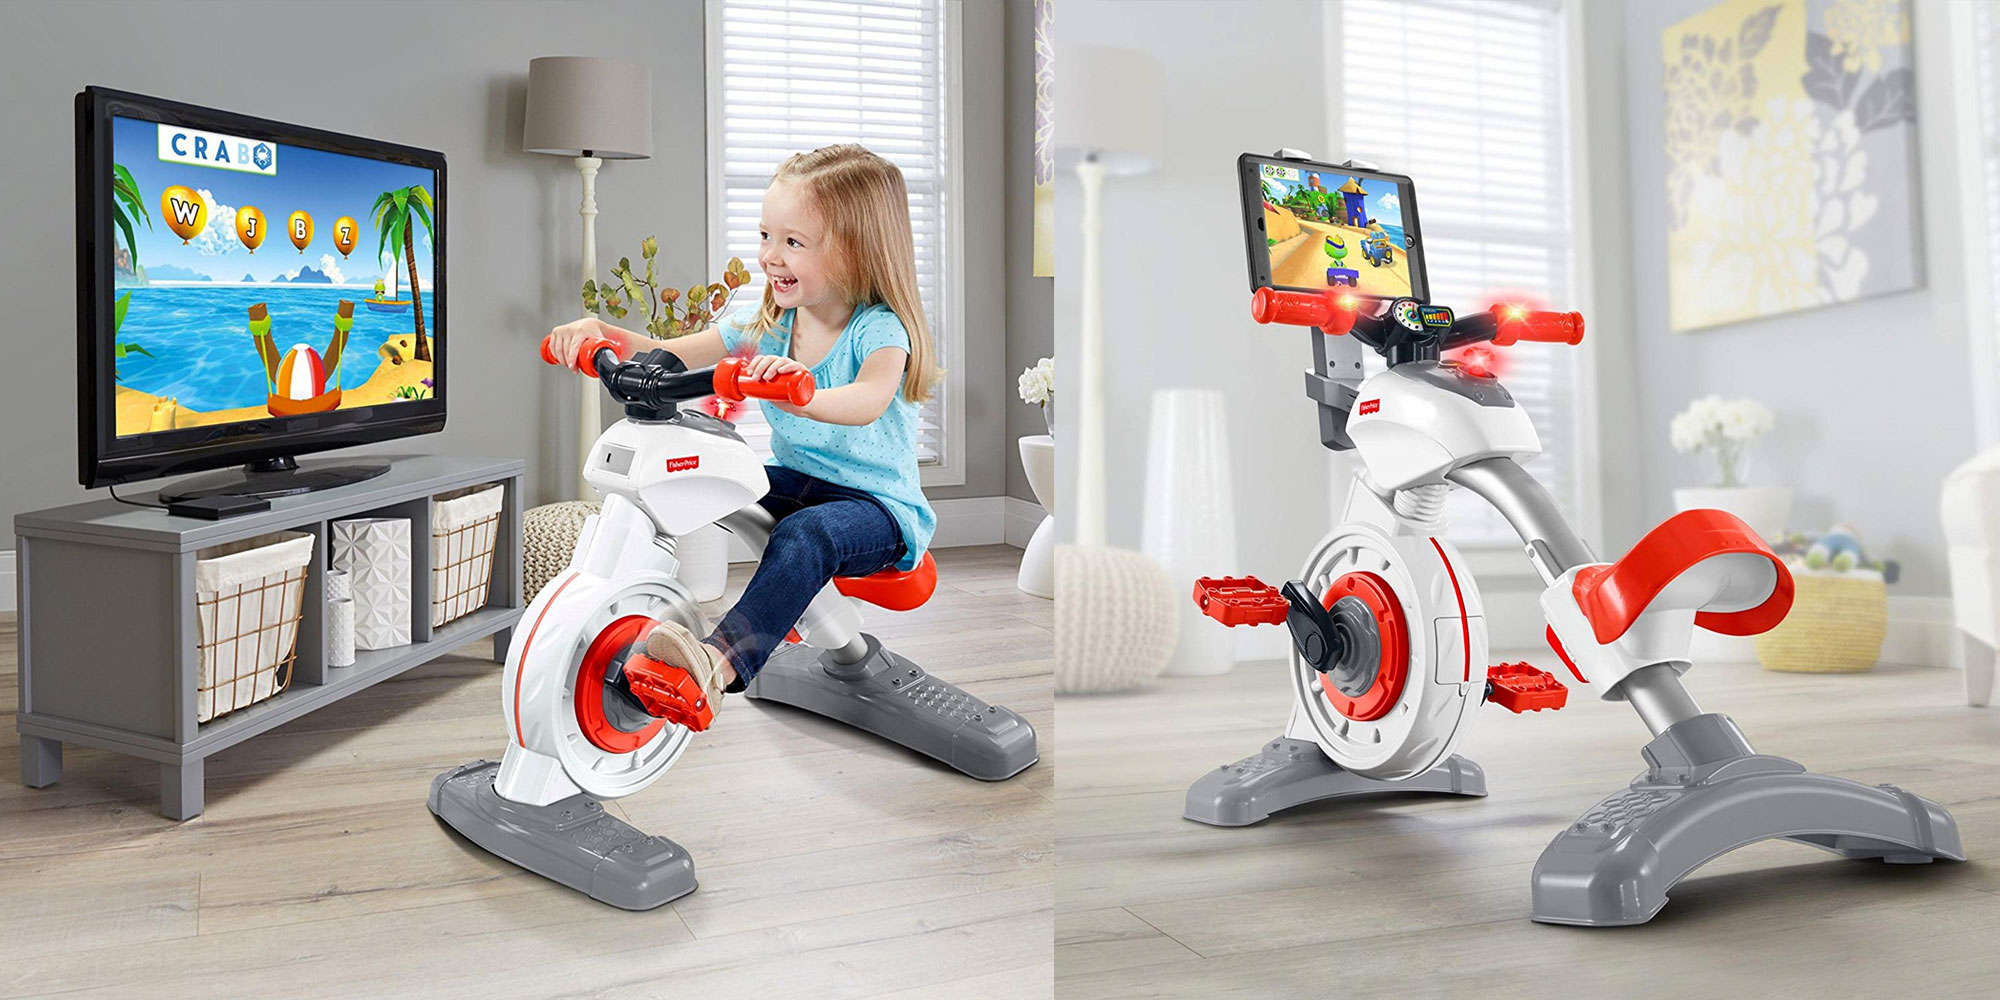 fisher price think and learn smart cycle